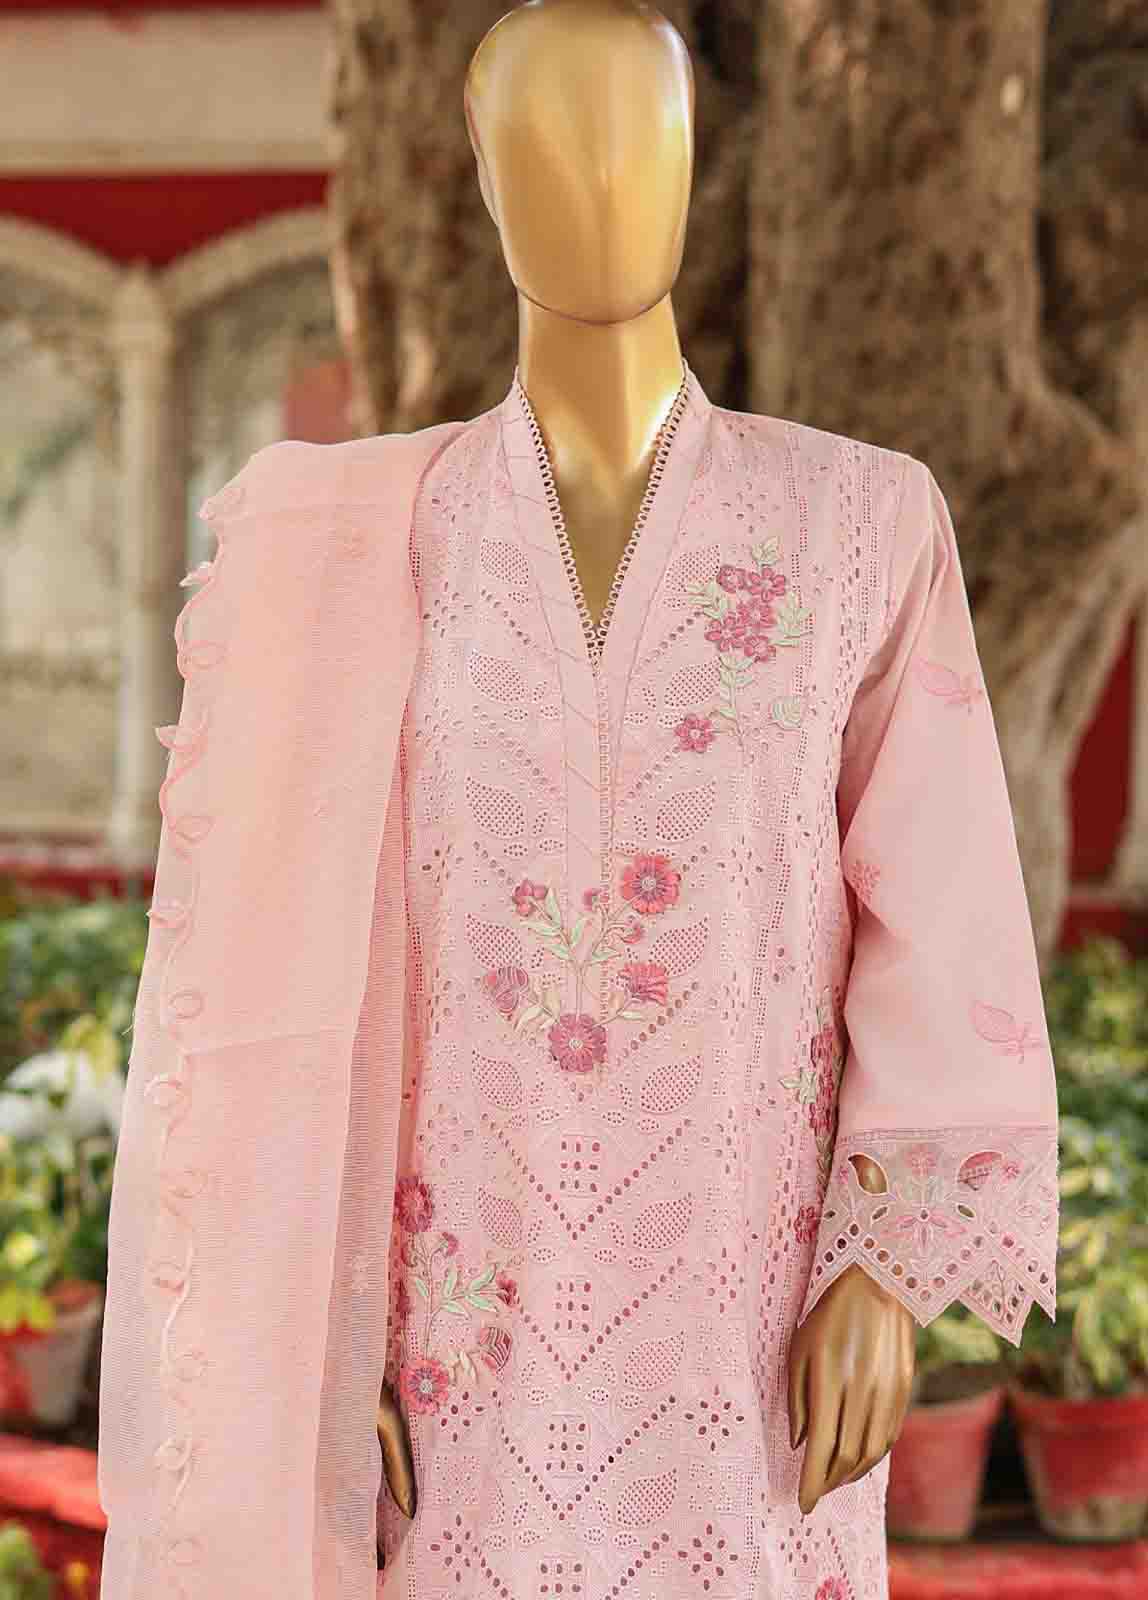 WTF-004 C- 3 Piece Embroidered Stitched Suit